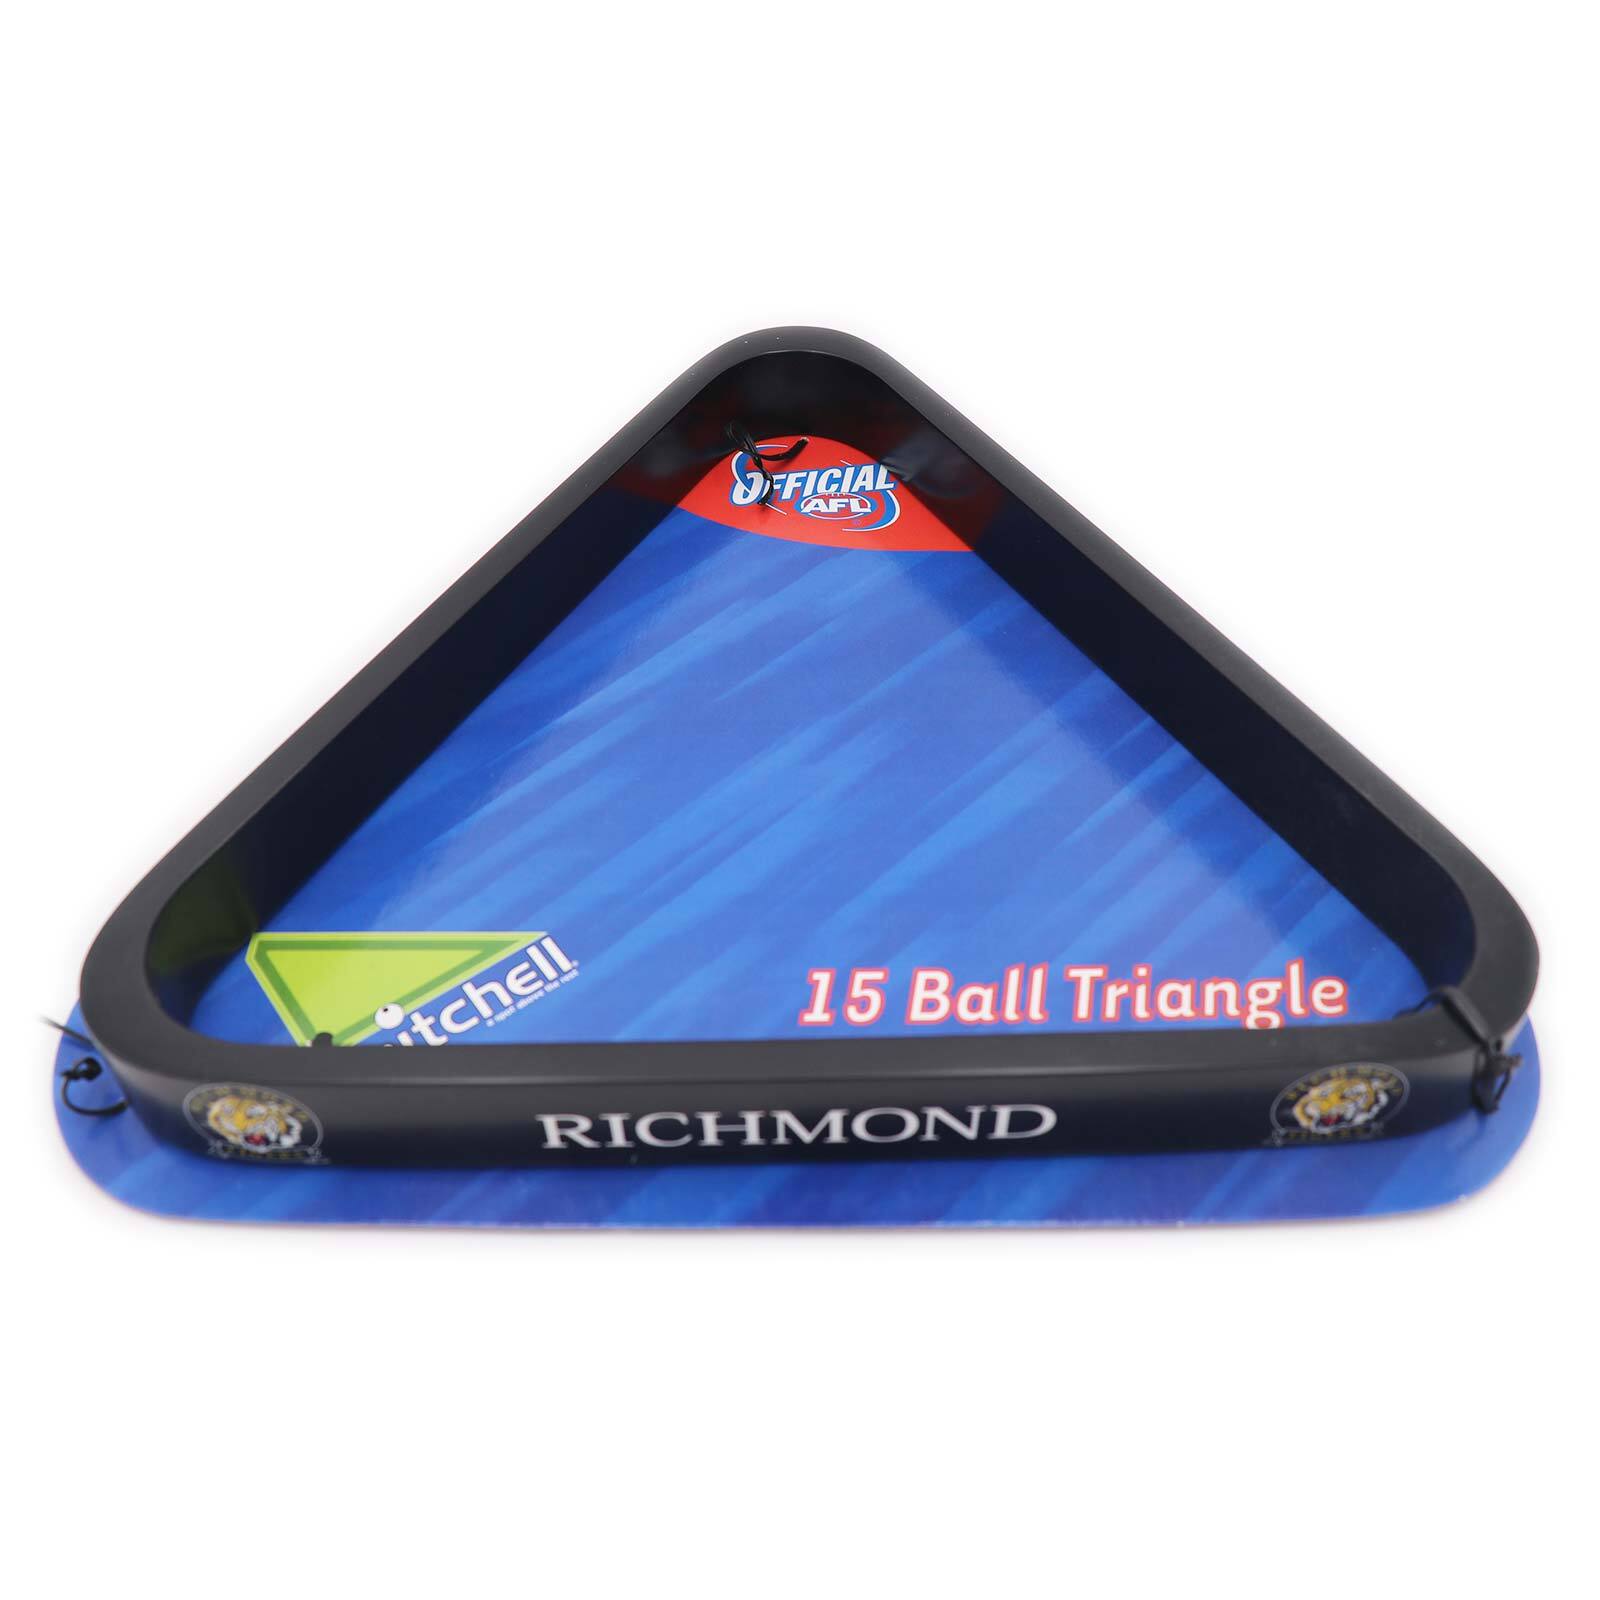 Aramith  Official AFL Pool Snooker Billiards 15 Ball Triangle - Richmond